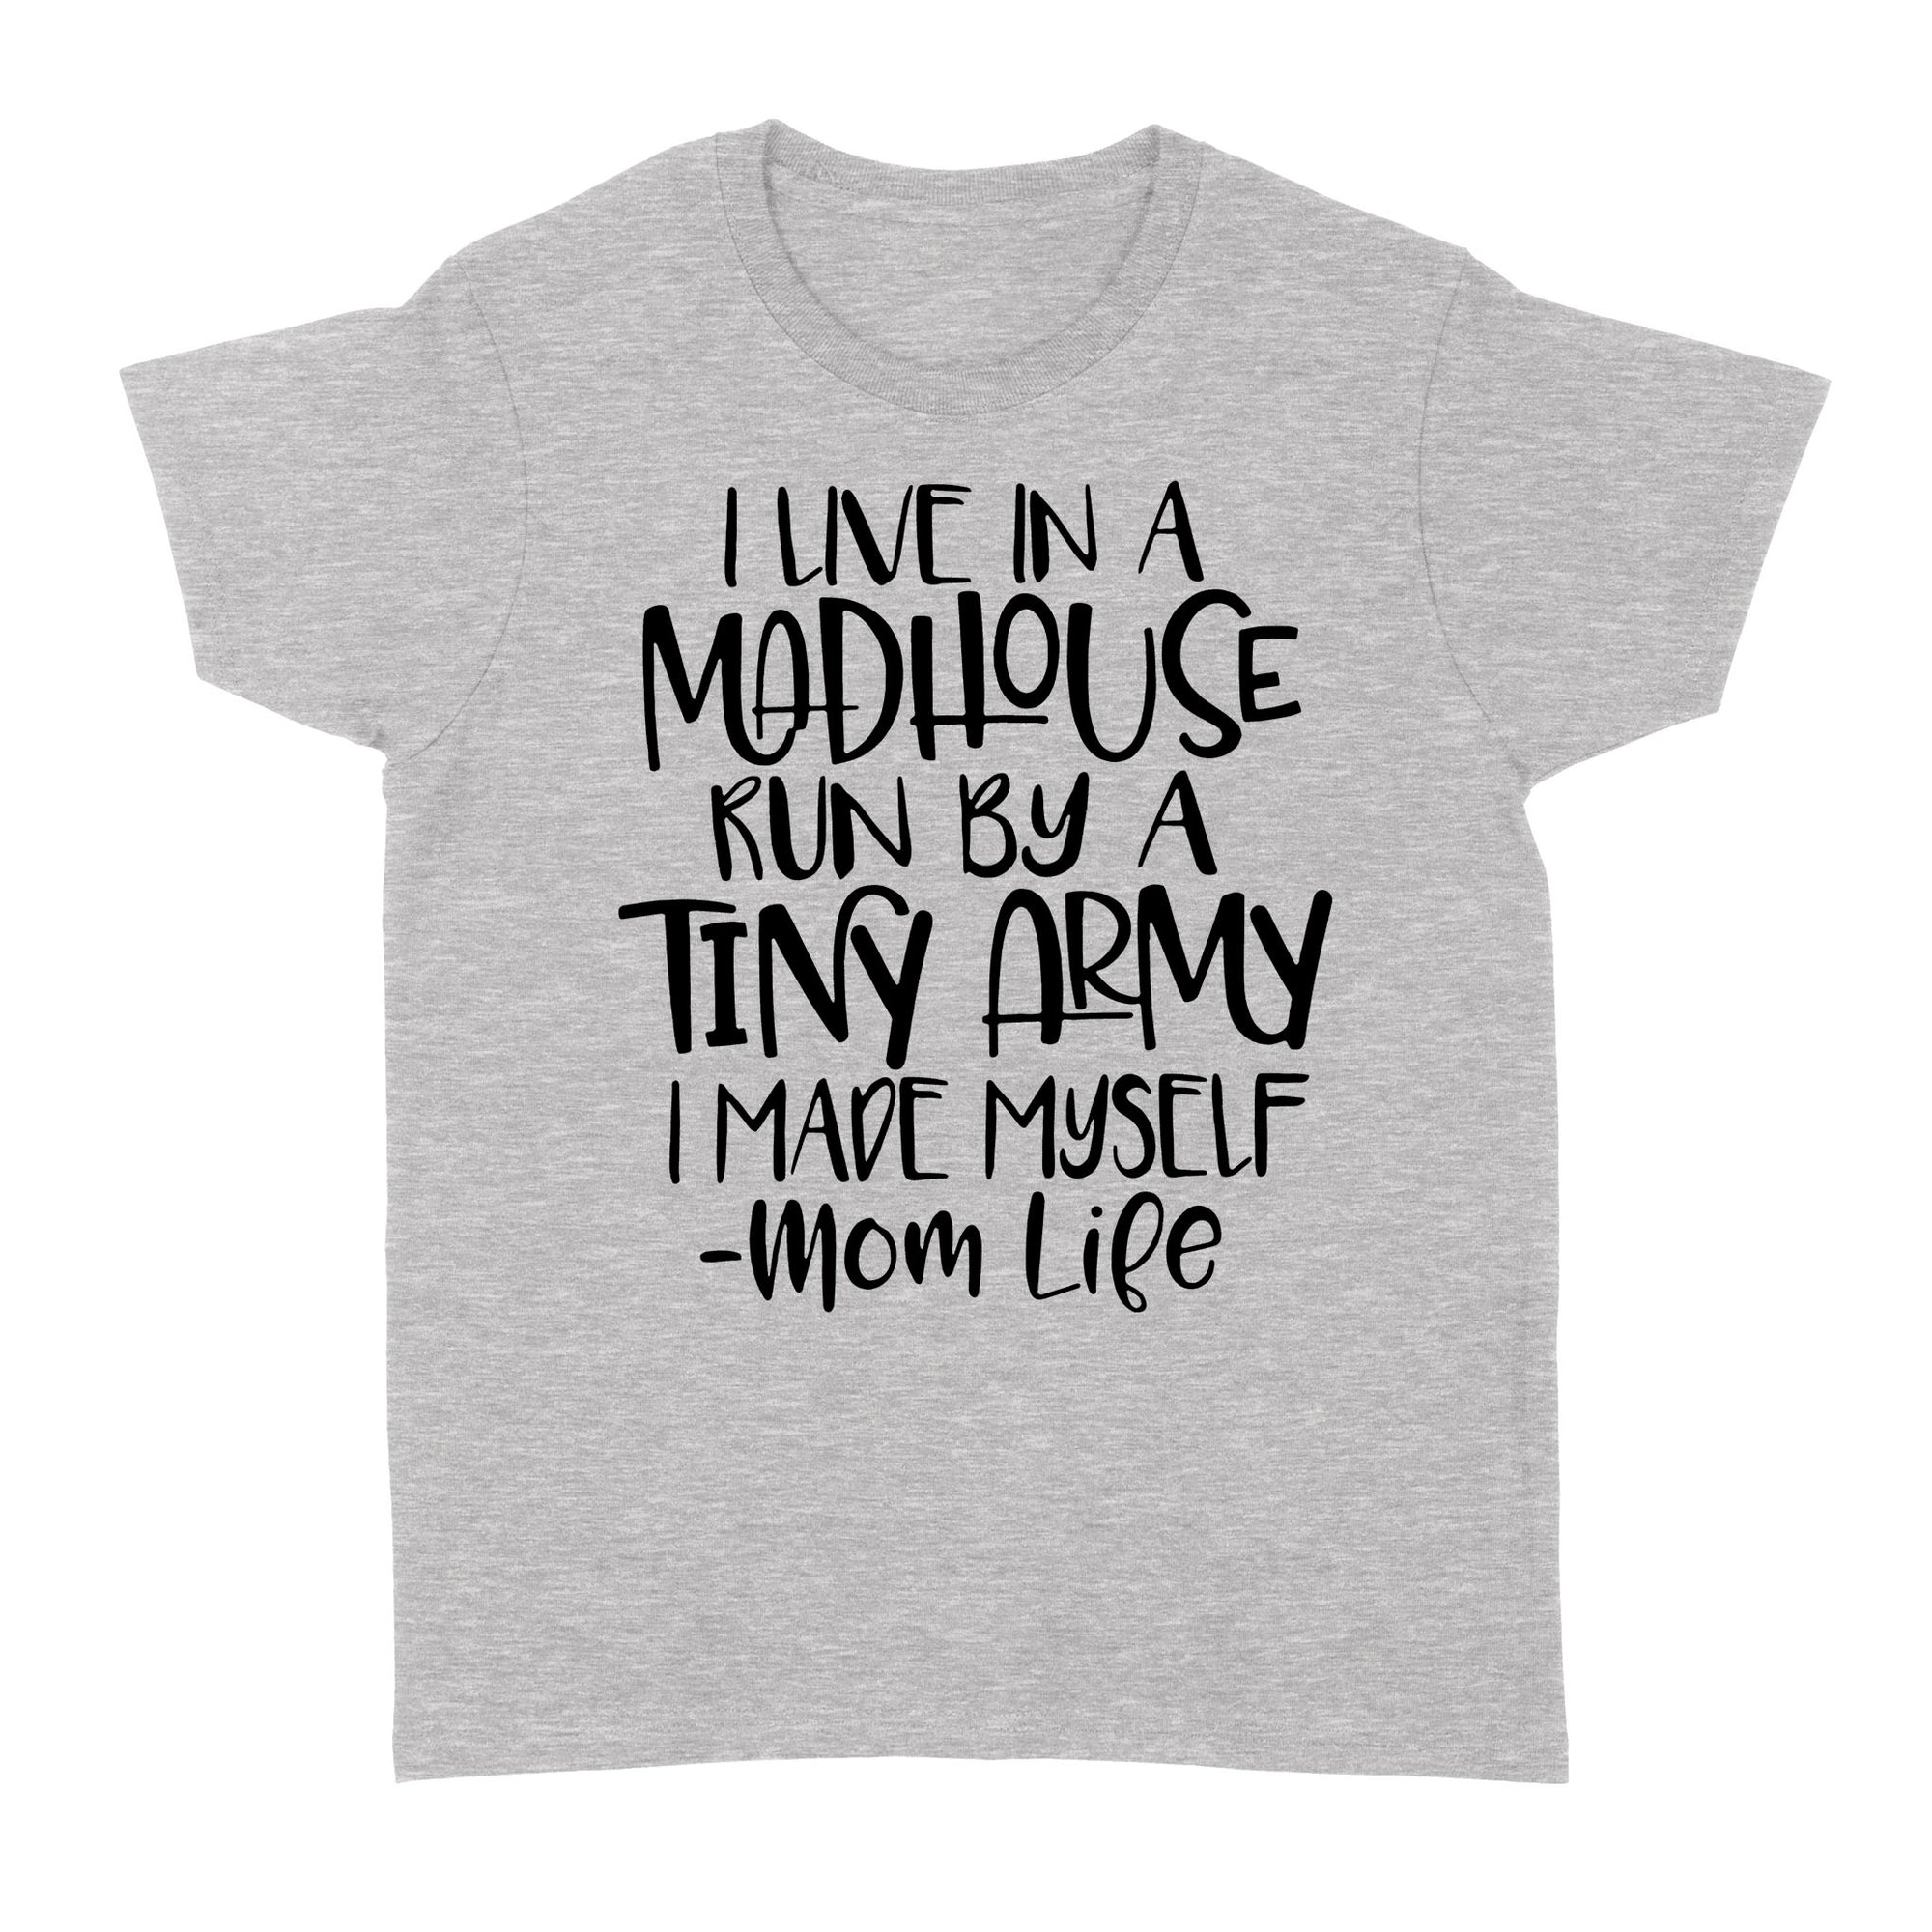 Gift Ideas for Mom Mothers Day I Live In A Madhouse Run By A Tiny Army I Made Myself Momlife W - Standard Women's T-shirt